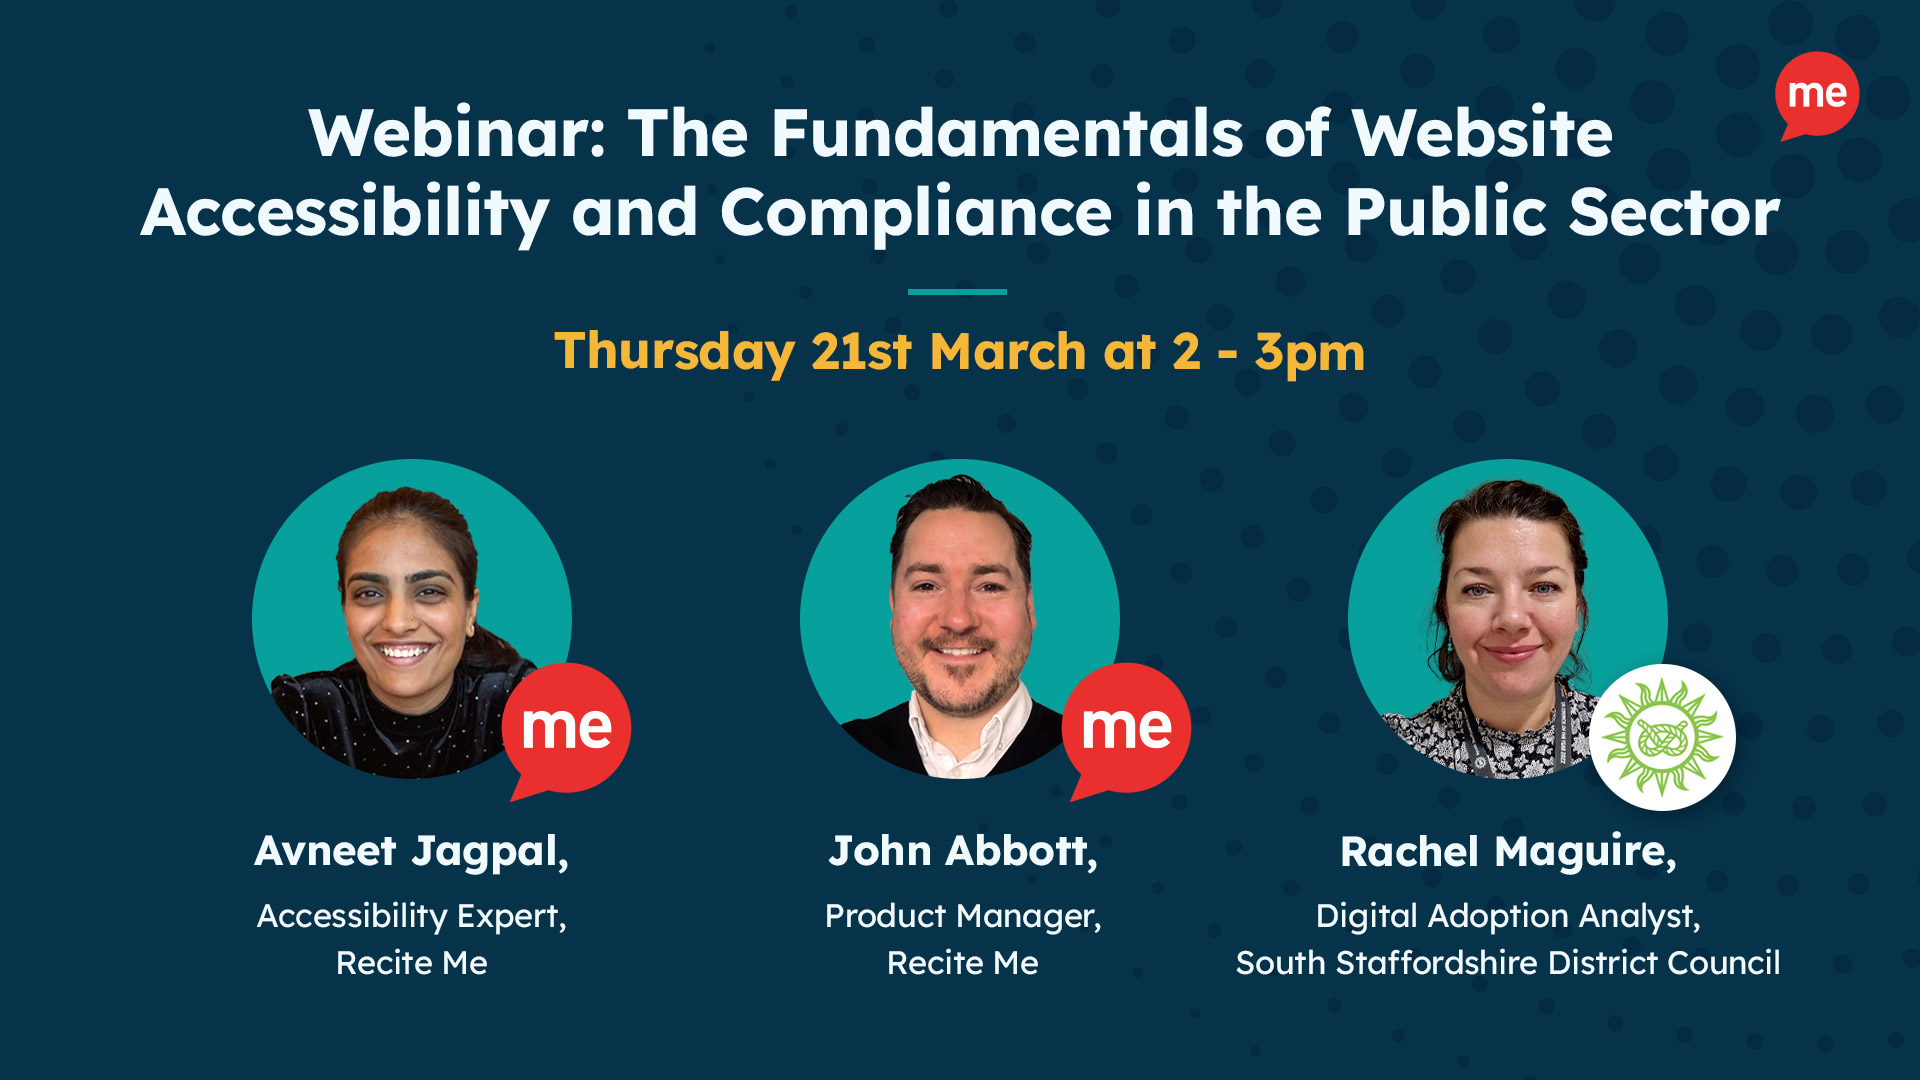 Webinar: The Fundamentals of Website Accessibility and Compliance in the Public Sector and headshots of the panellists